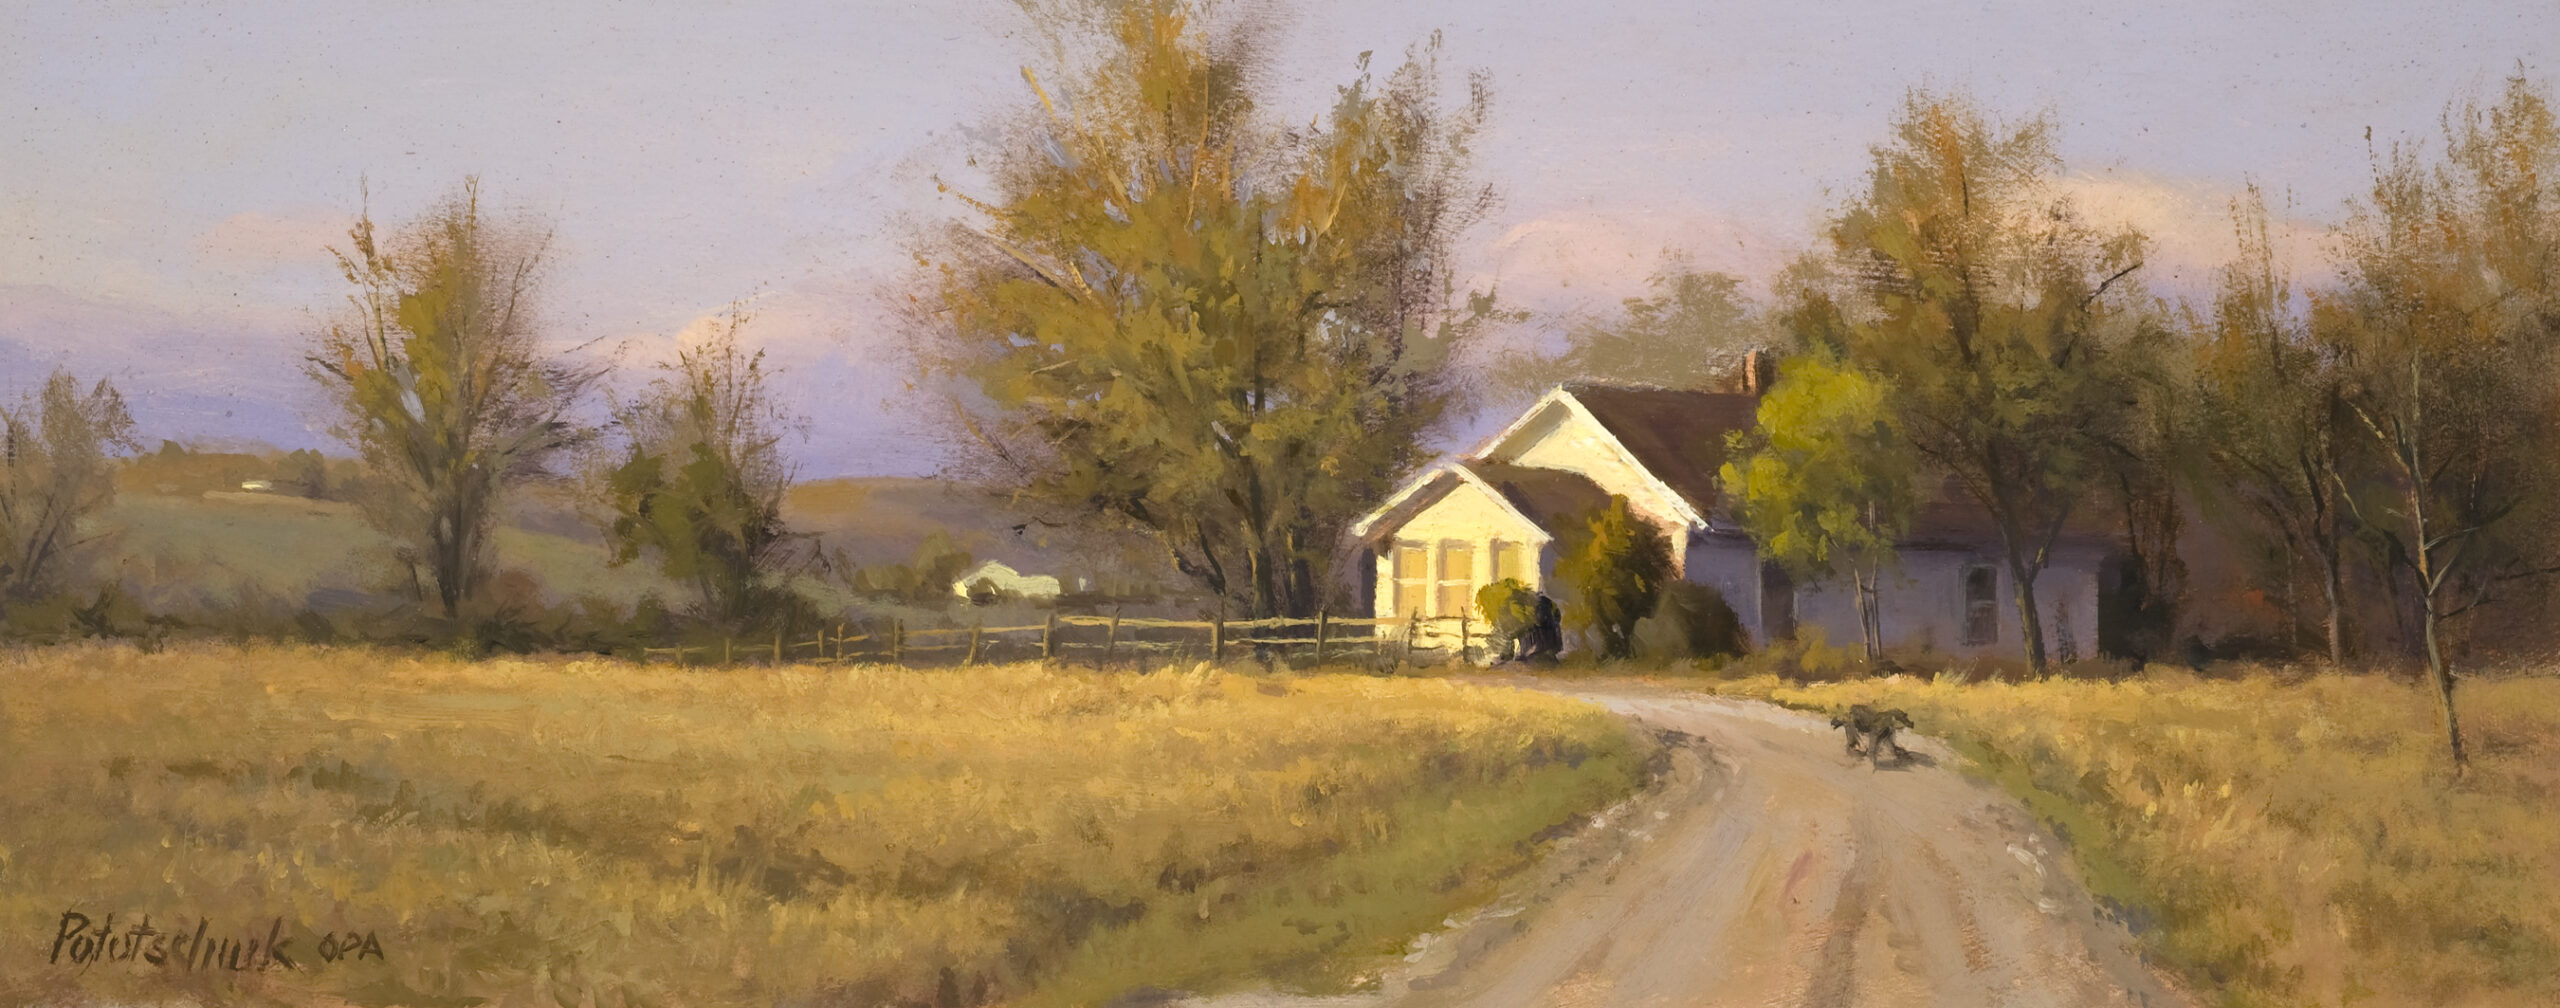 How to paint realistic landscapes